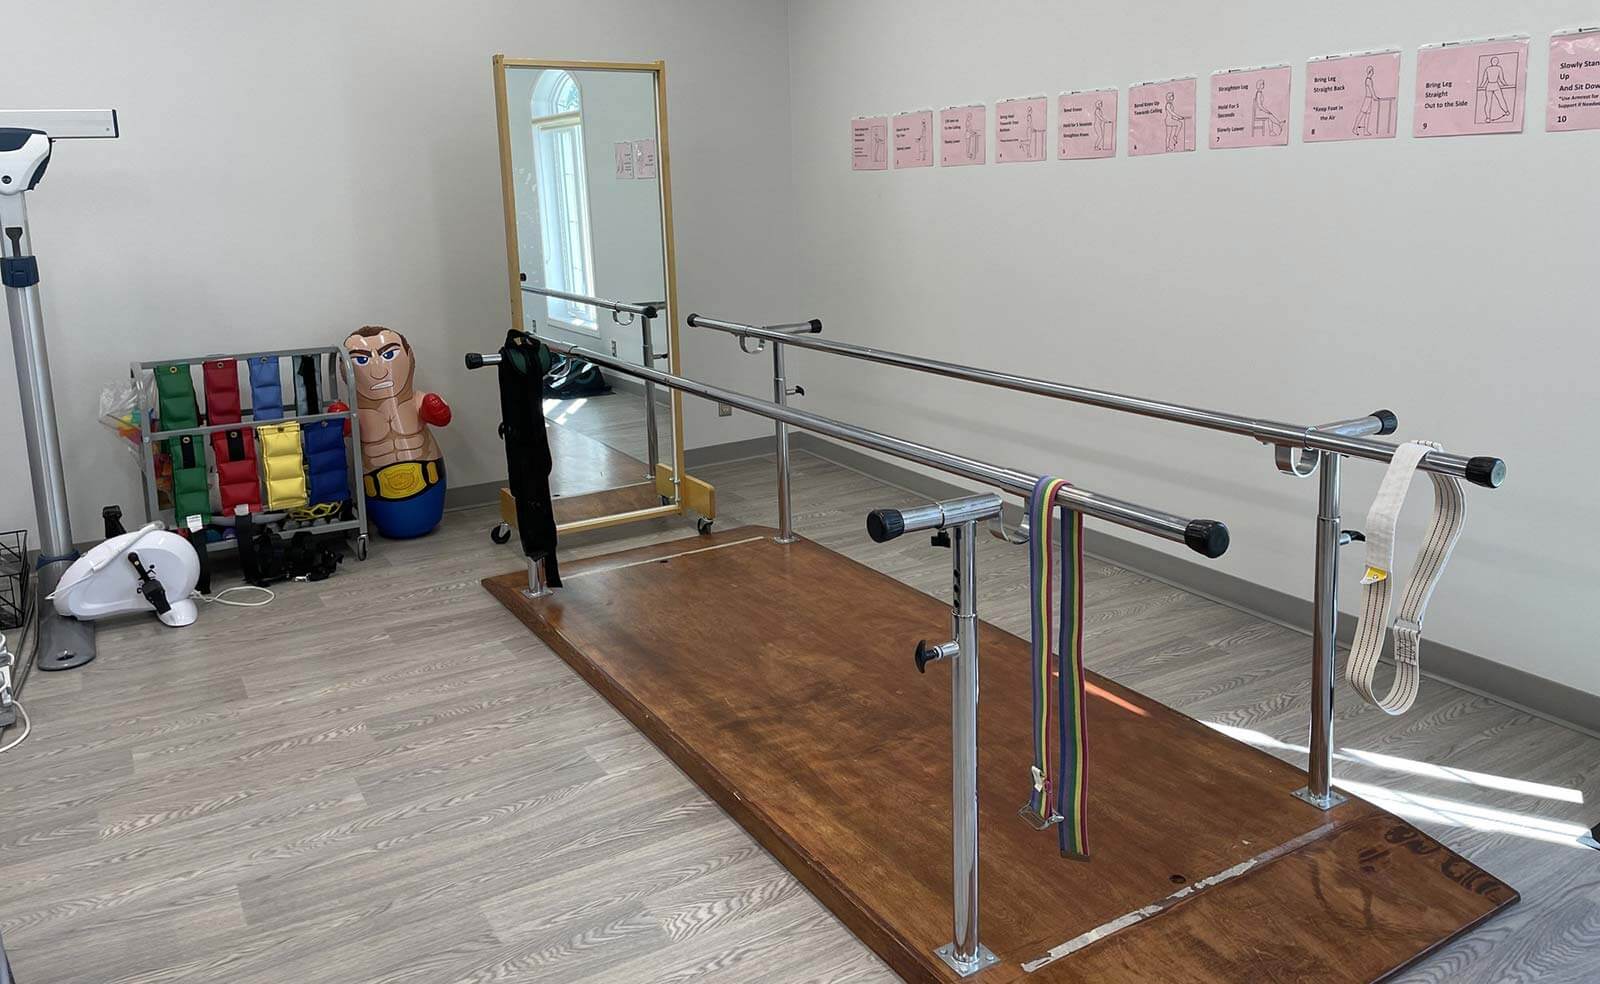 A room with a mirror and various exercise equipment, including parallel bars